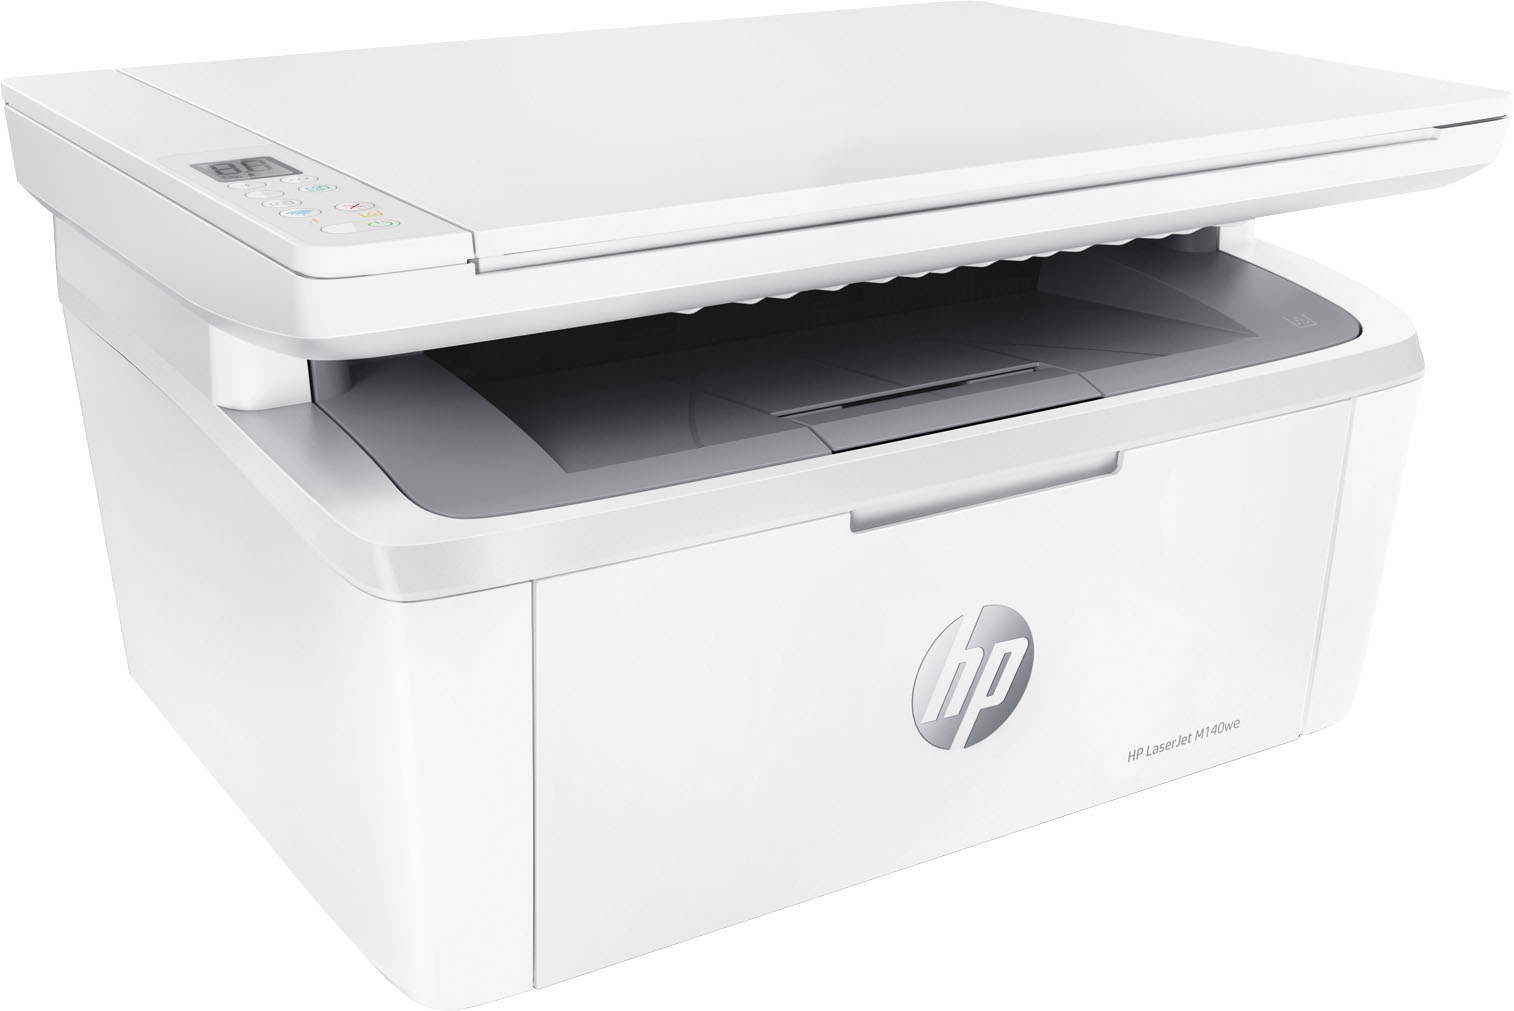 Left View: HP - LaserJet M140we Wireless Black and White Laser Printer with 6 months of Instant Ink included with HP+ - White